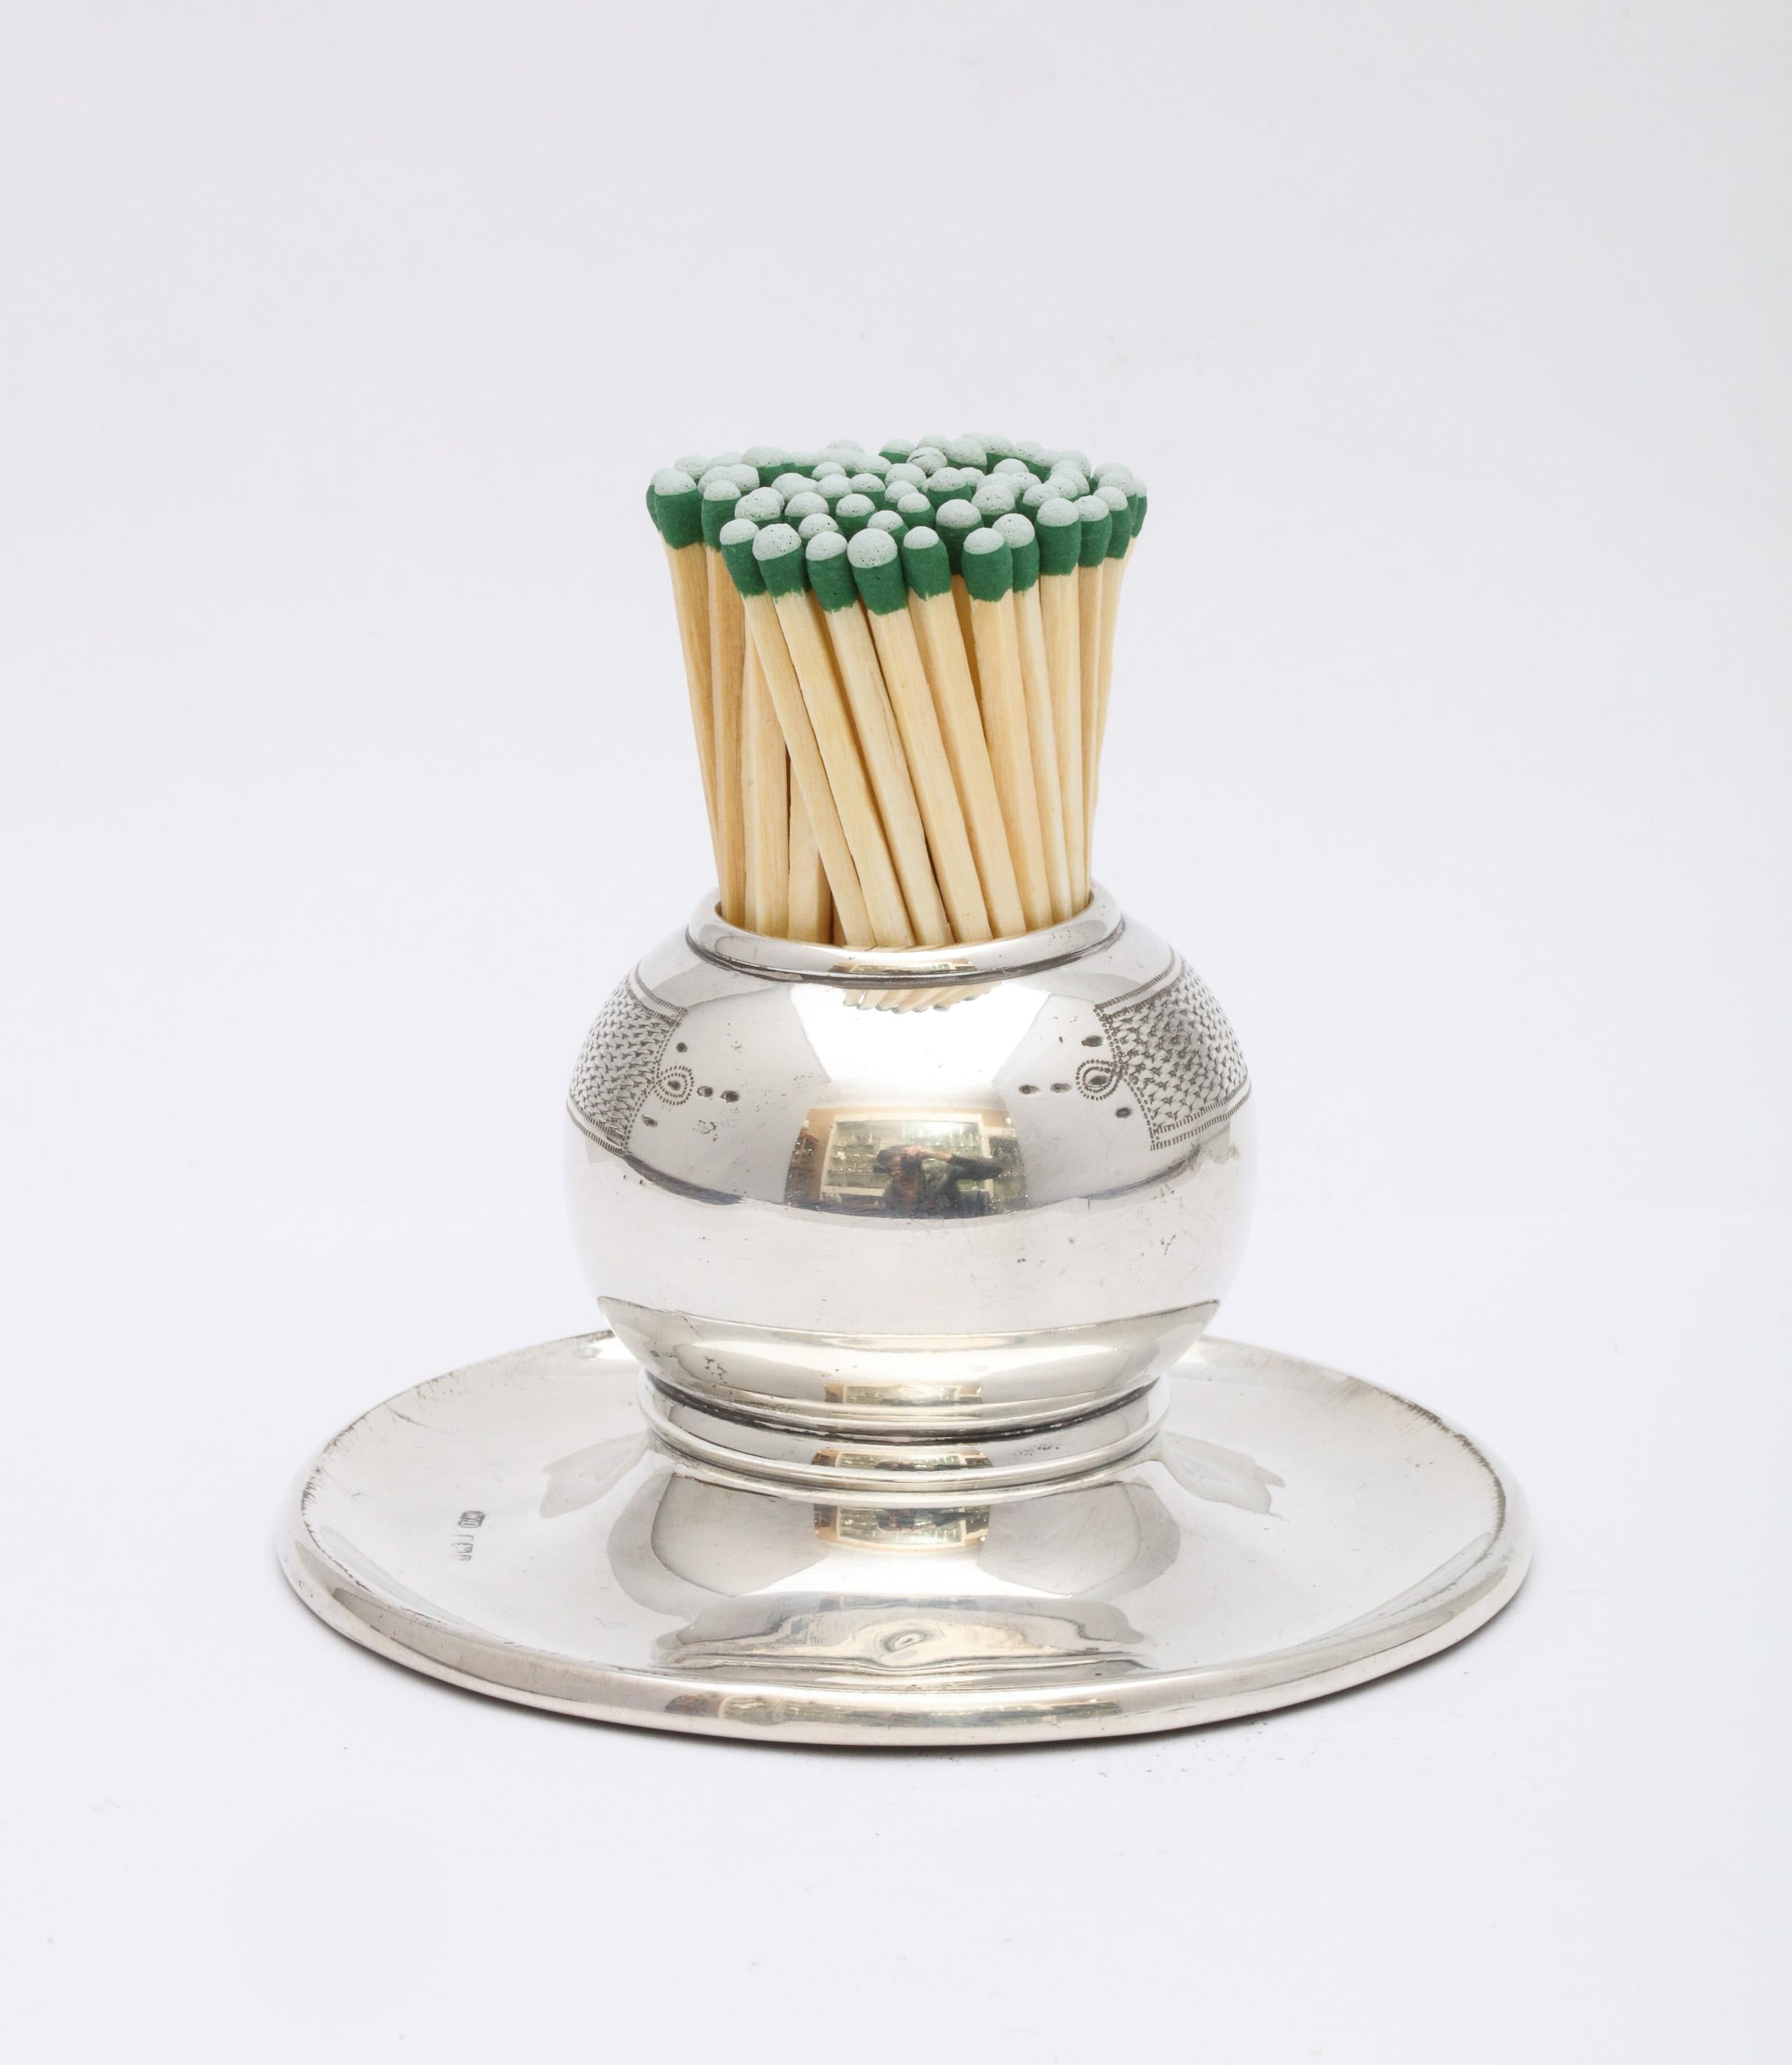 Edwardian, all sterling silver match striker on sterling silver base, Birmingham, England, 1901, William Devenport - maker. Weighted. Matches are struck on engine-turned portion of the match cup; base serves to hold used matches. Measures just under